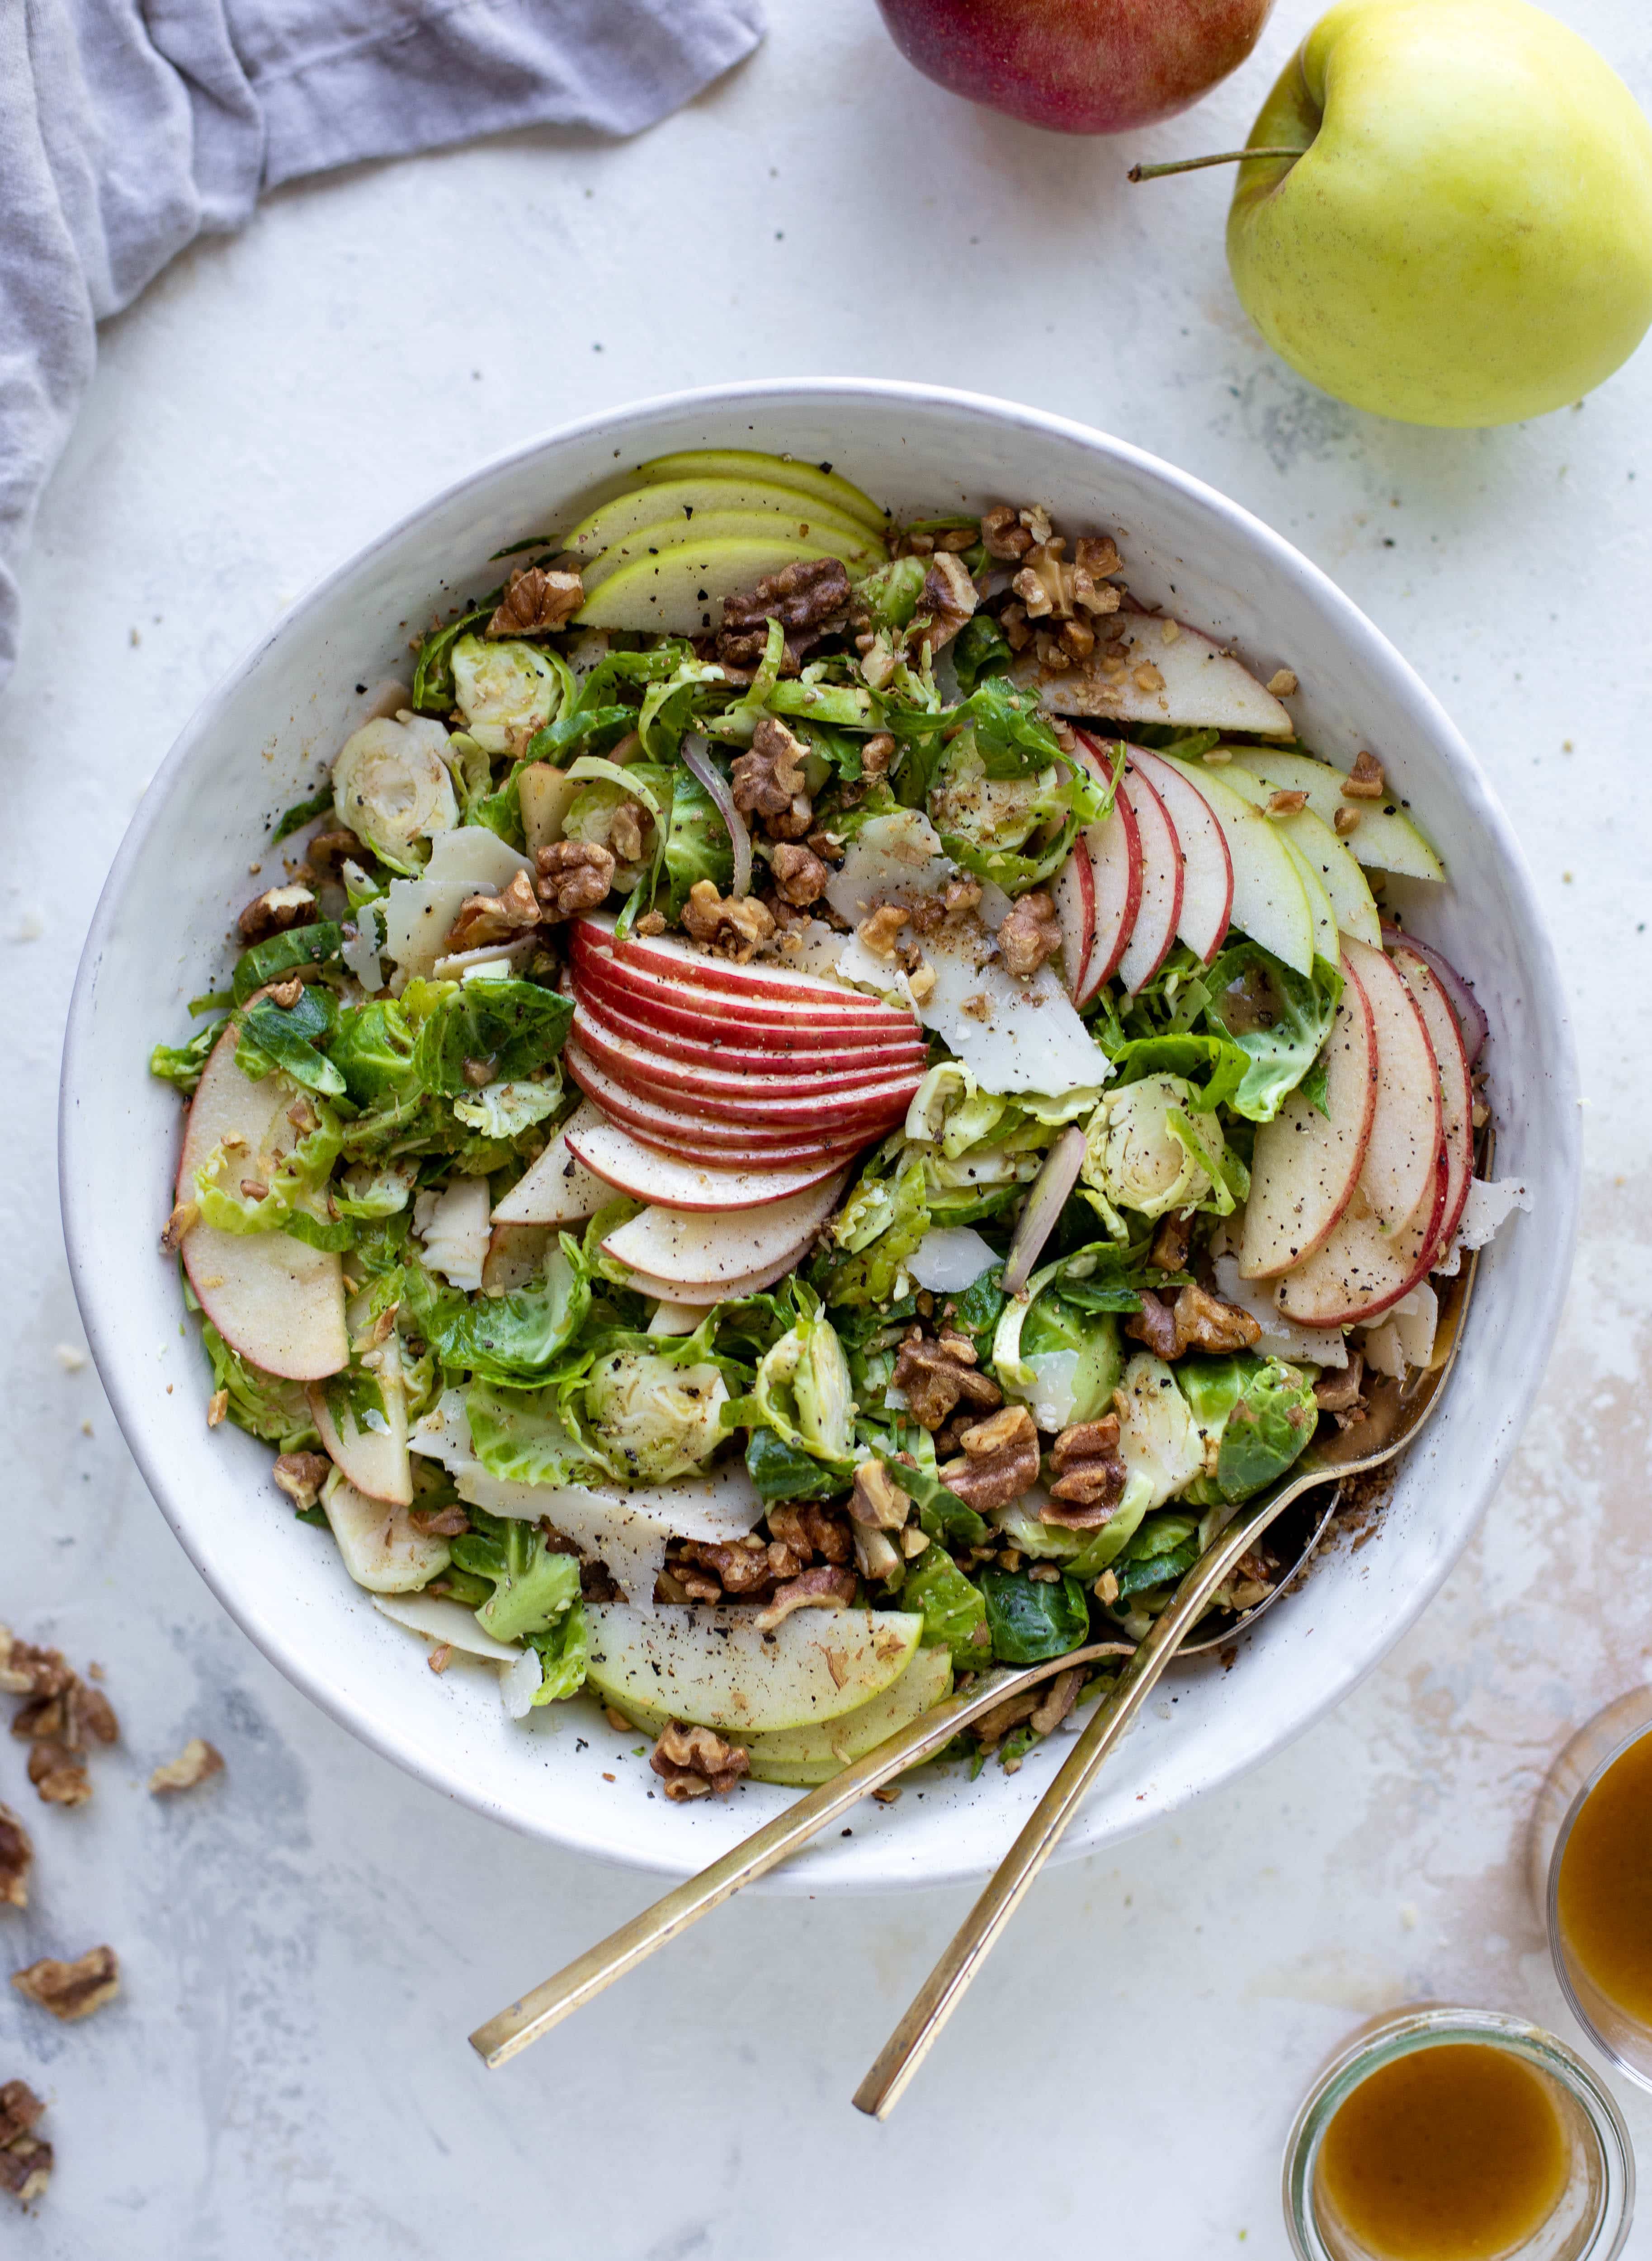 This crunchy brussels sprouts apple salad is filled with sprouts, apples, shallots, cinnamon toasted walnuts and drizzled with a brown butter dressing. 